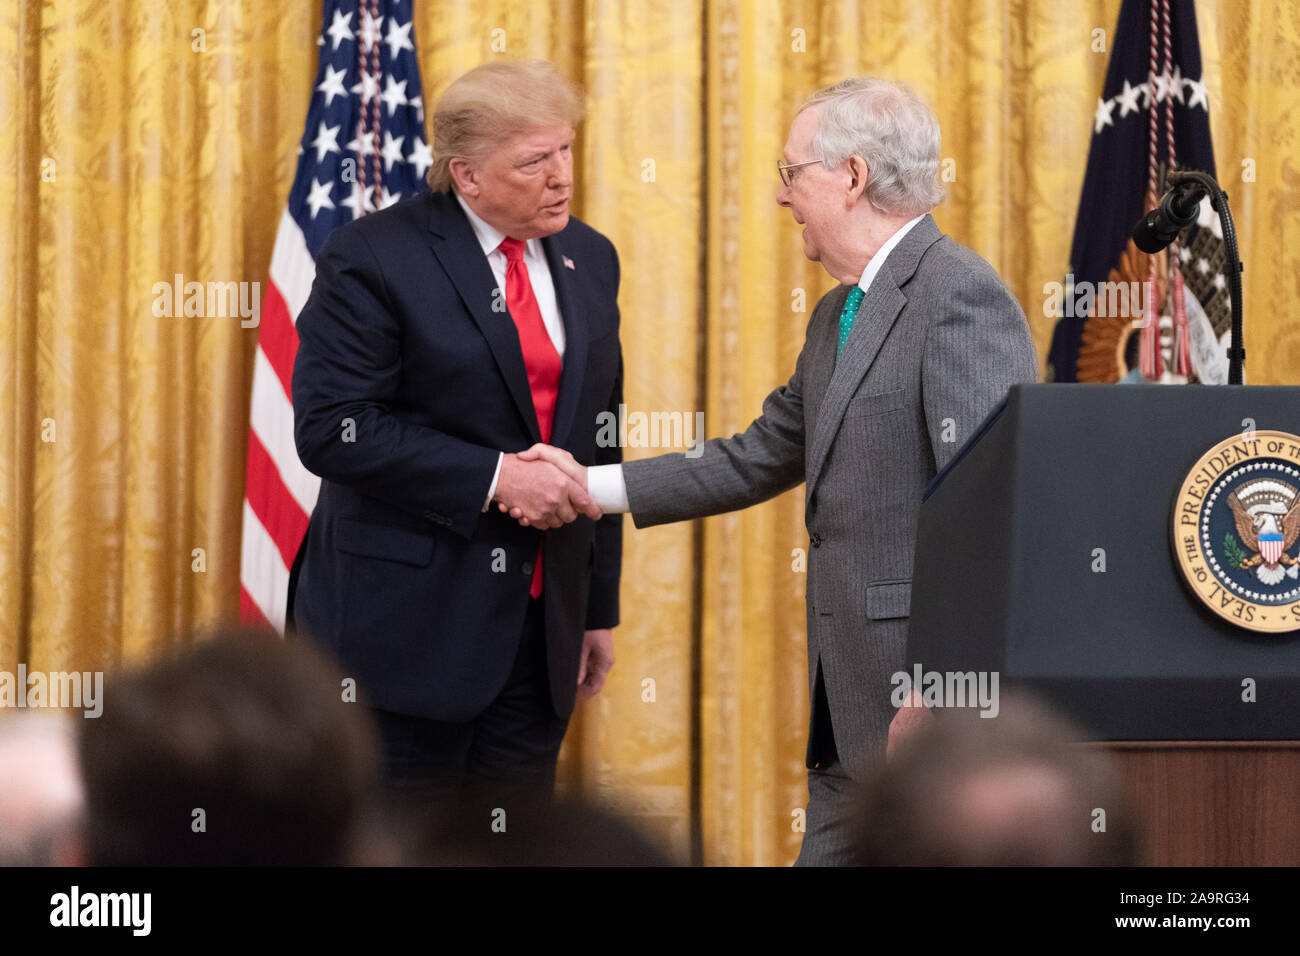 President Donald J. Trump honors Senate Majority Leader Mitch McConnell during the federal judicial confirmation milestones event, Wednesday, Nov. 6, 2019, in the East Room of the White House. Stock Photo